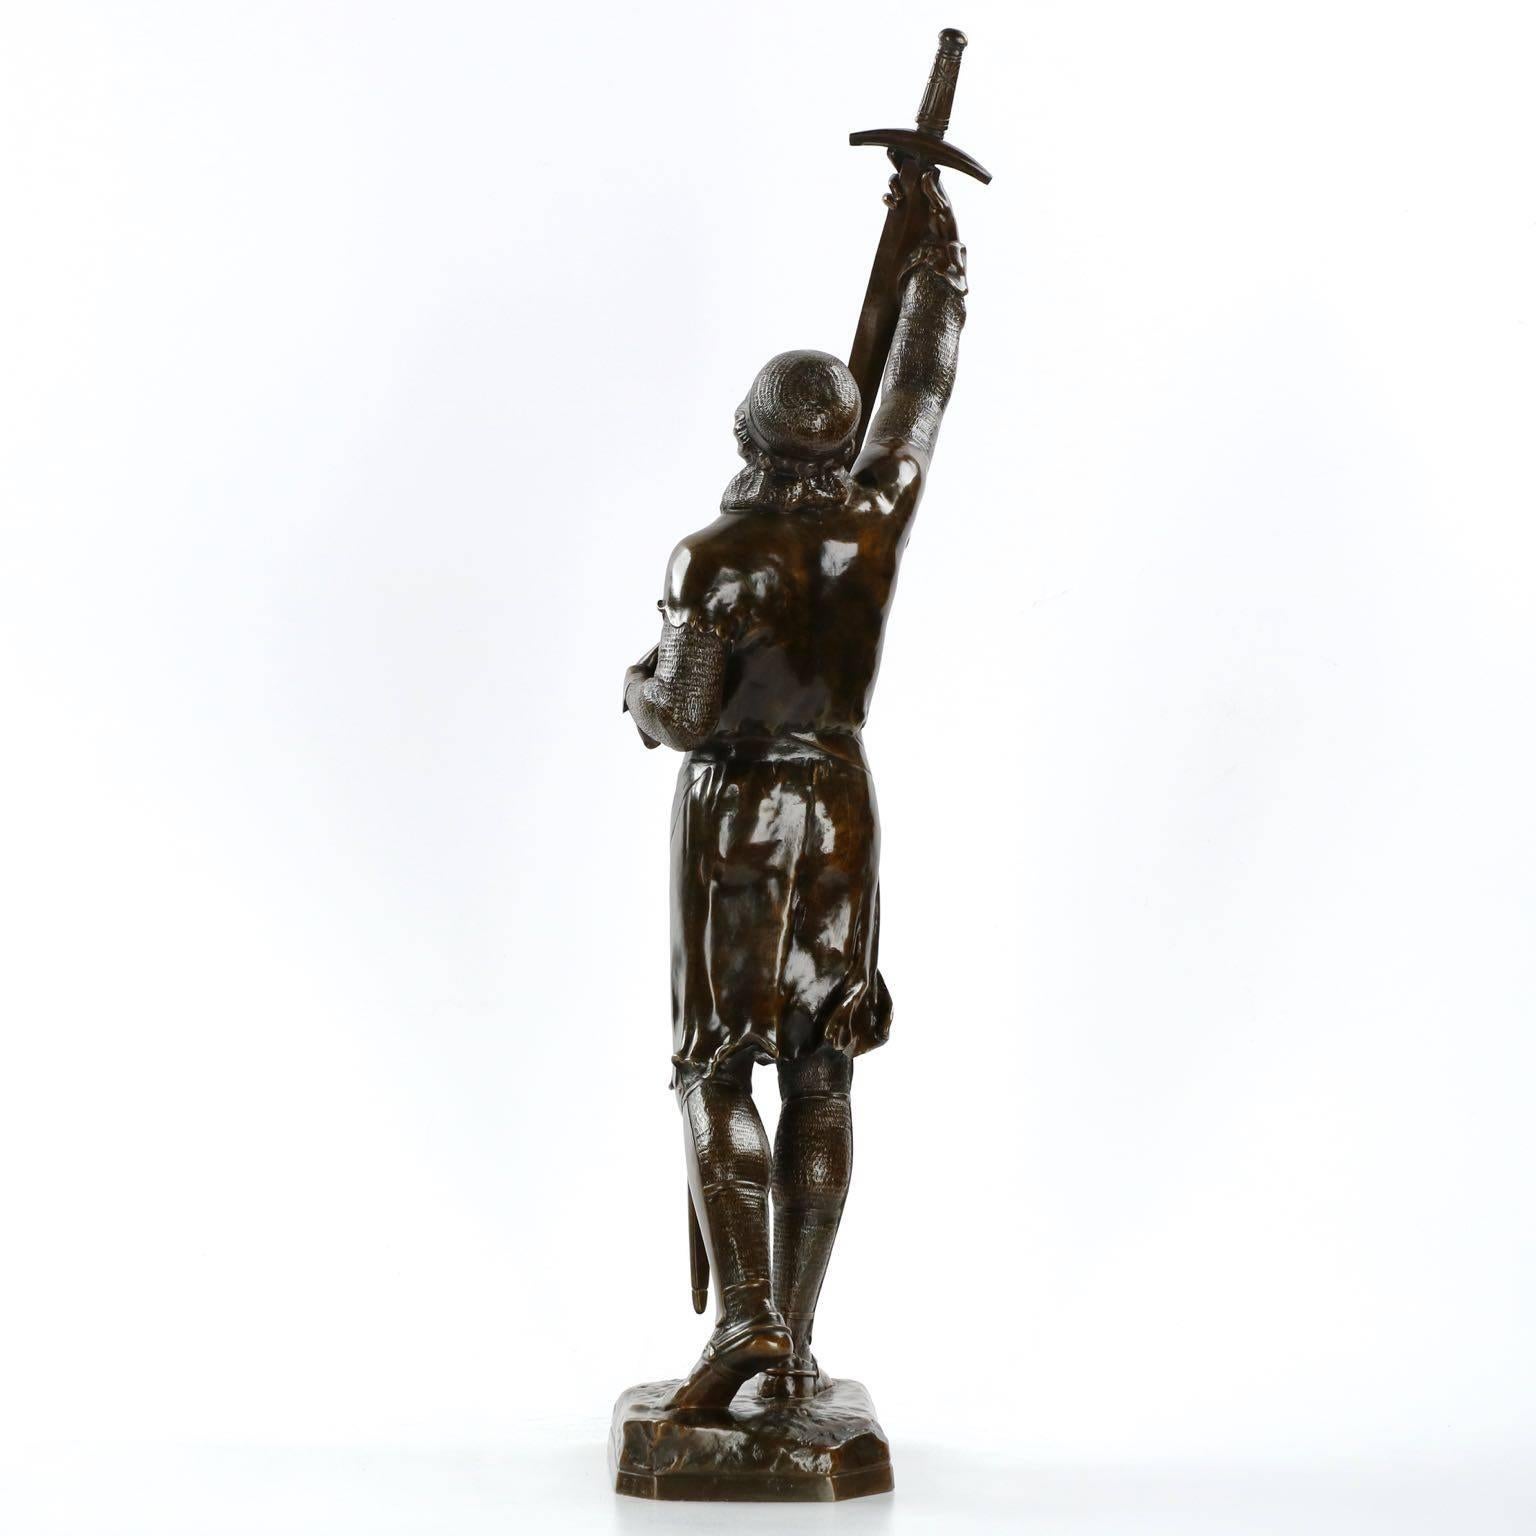 A most fine work also catalogued in Berman’s bronzes: Sculptors and Founders, Vol IV (1977, p. 679, f. 2497), the sculpture depicts a young medieval crusader in his chain mail, the cross of his uniform corresponding to the cross of his sword as he